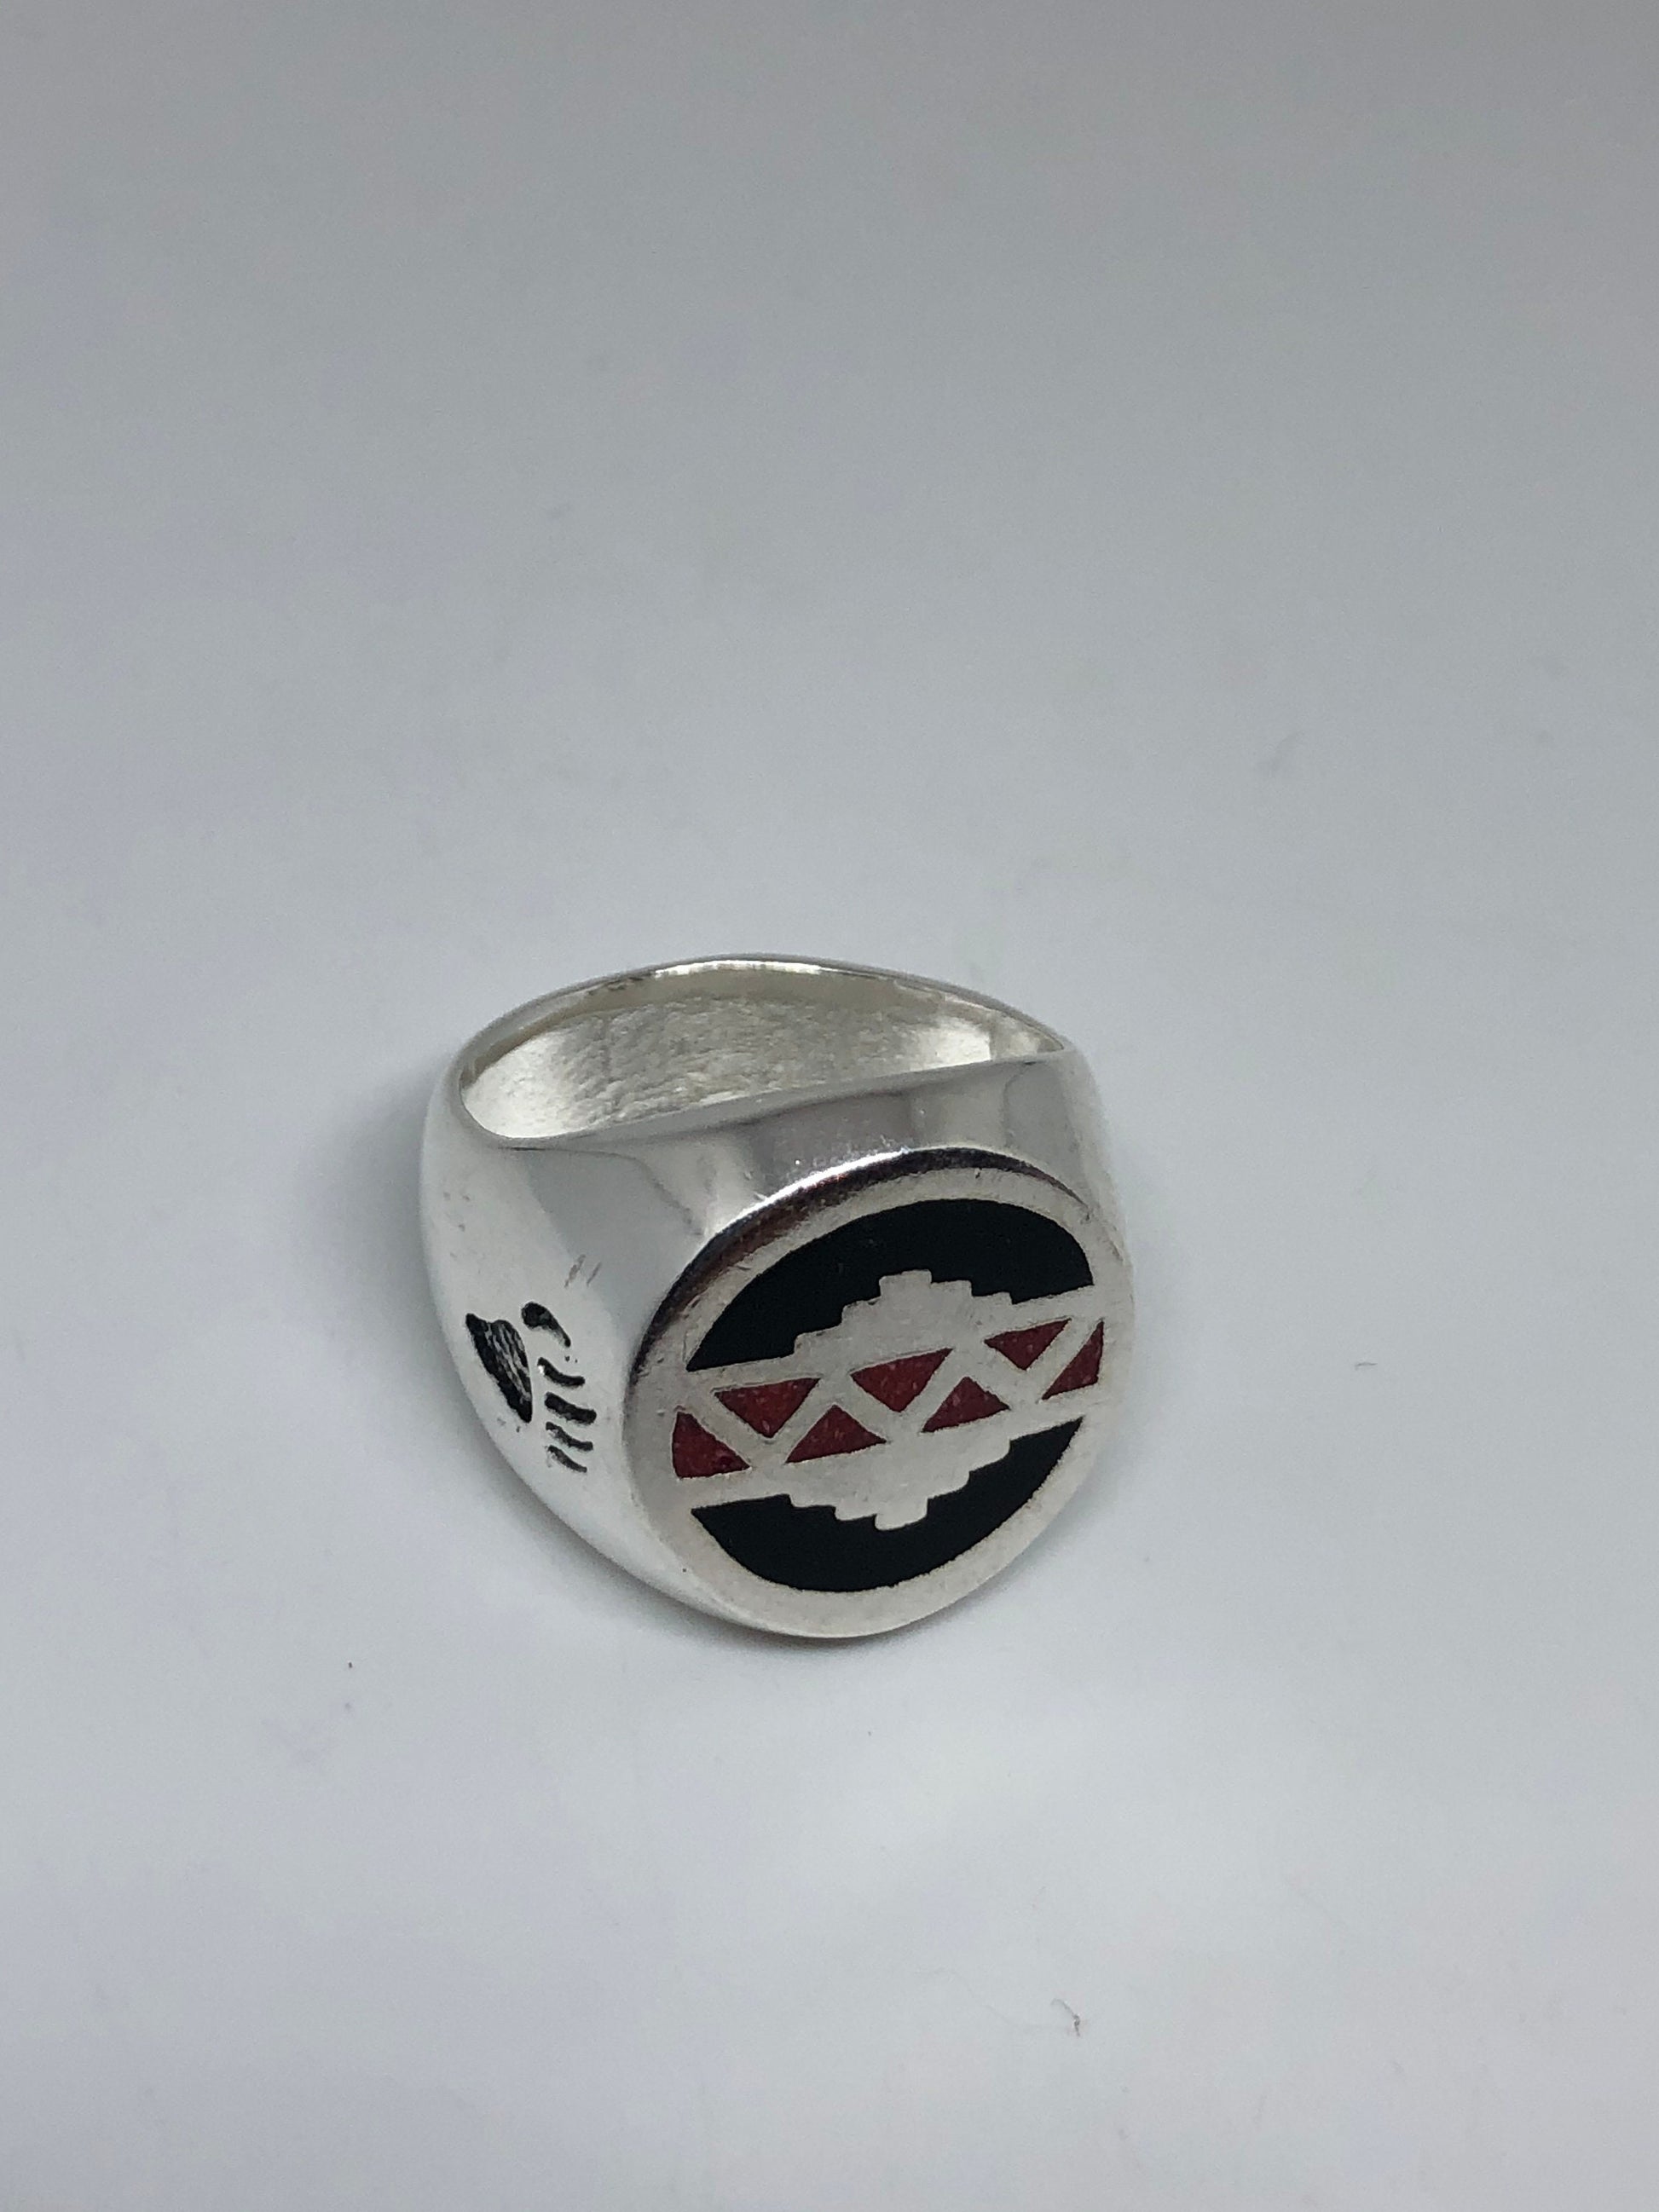 Vintage Native American Style Southwestern Stone Inlay Mens Ring